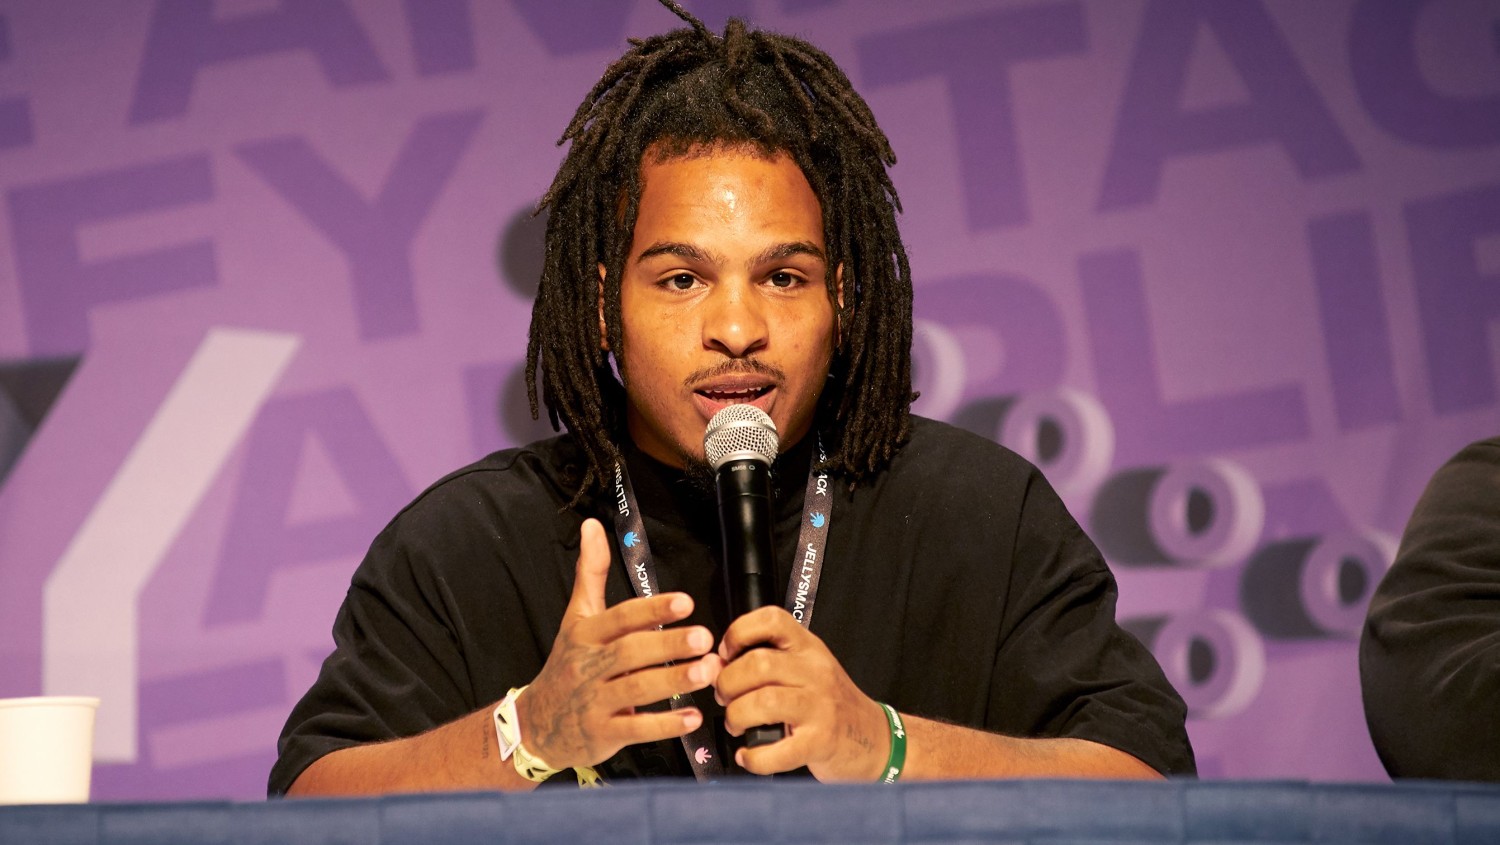 Keith Lee speaks at VidCon Anaheim 2023 on June 23, 2023, in Anaheim, California. Lee is one of TikTok's most popular food influencers.Unique Nicole/Getty Images